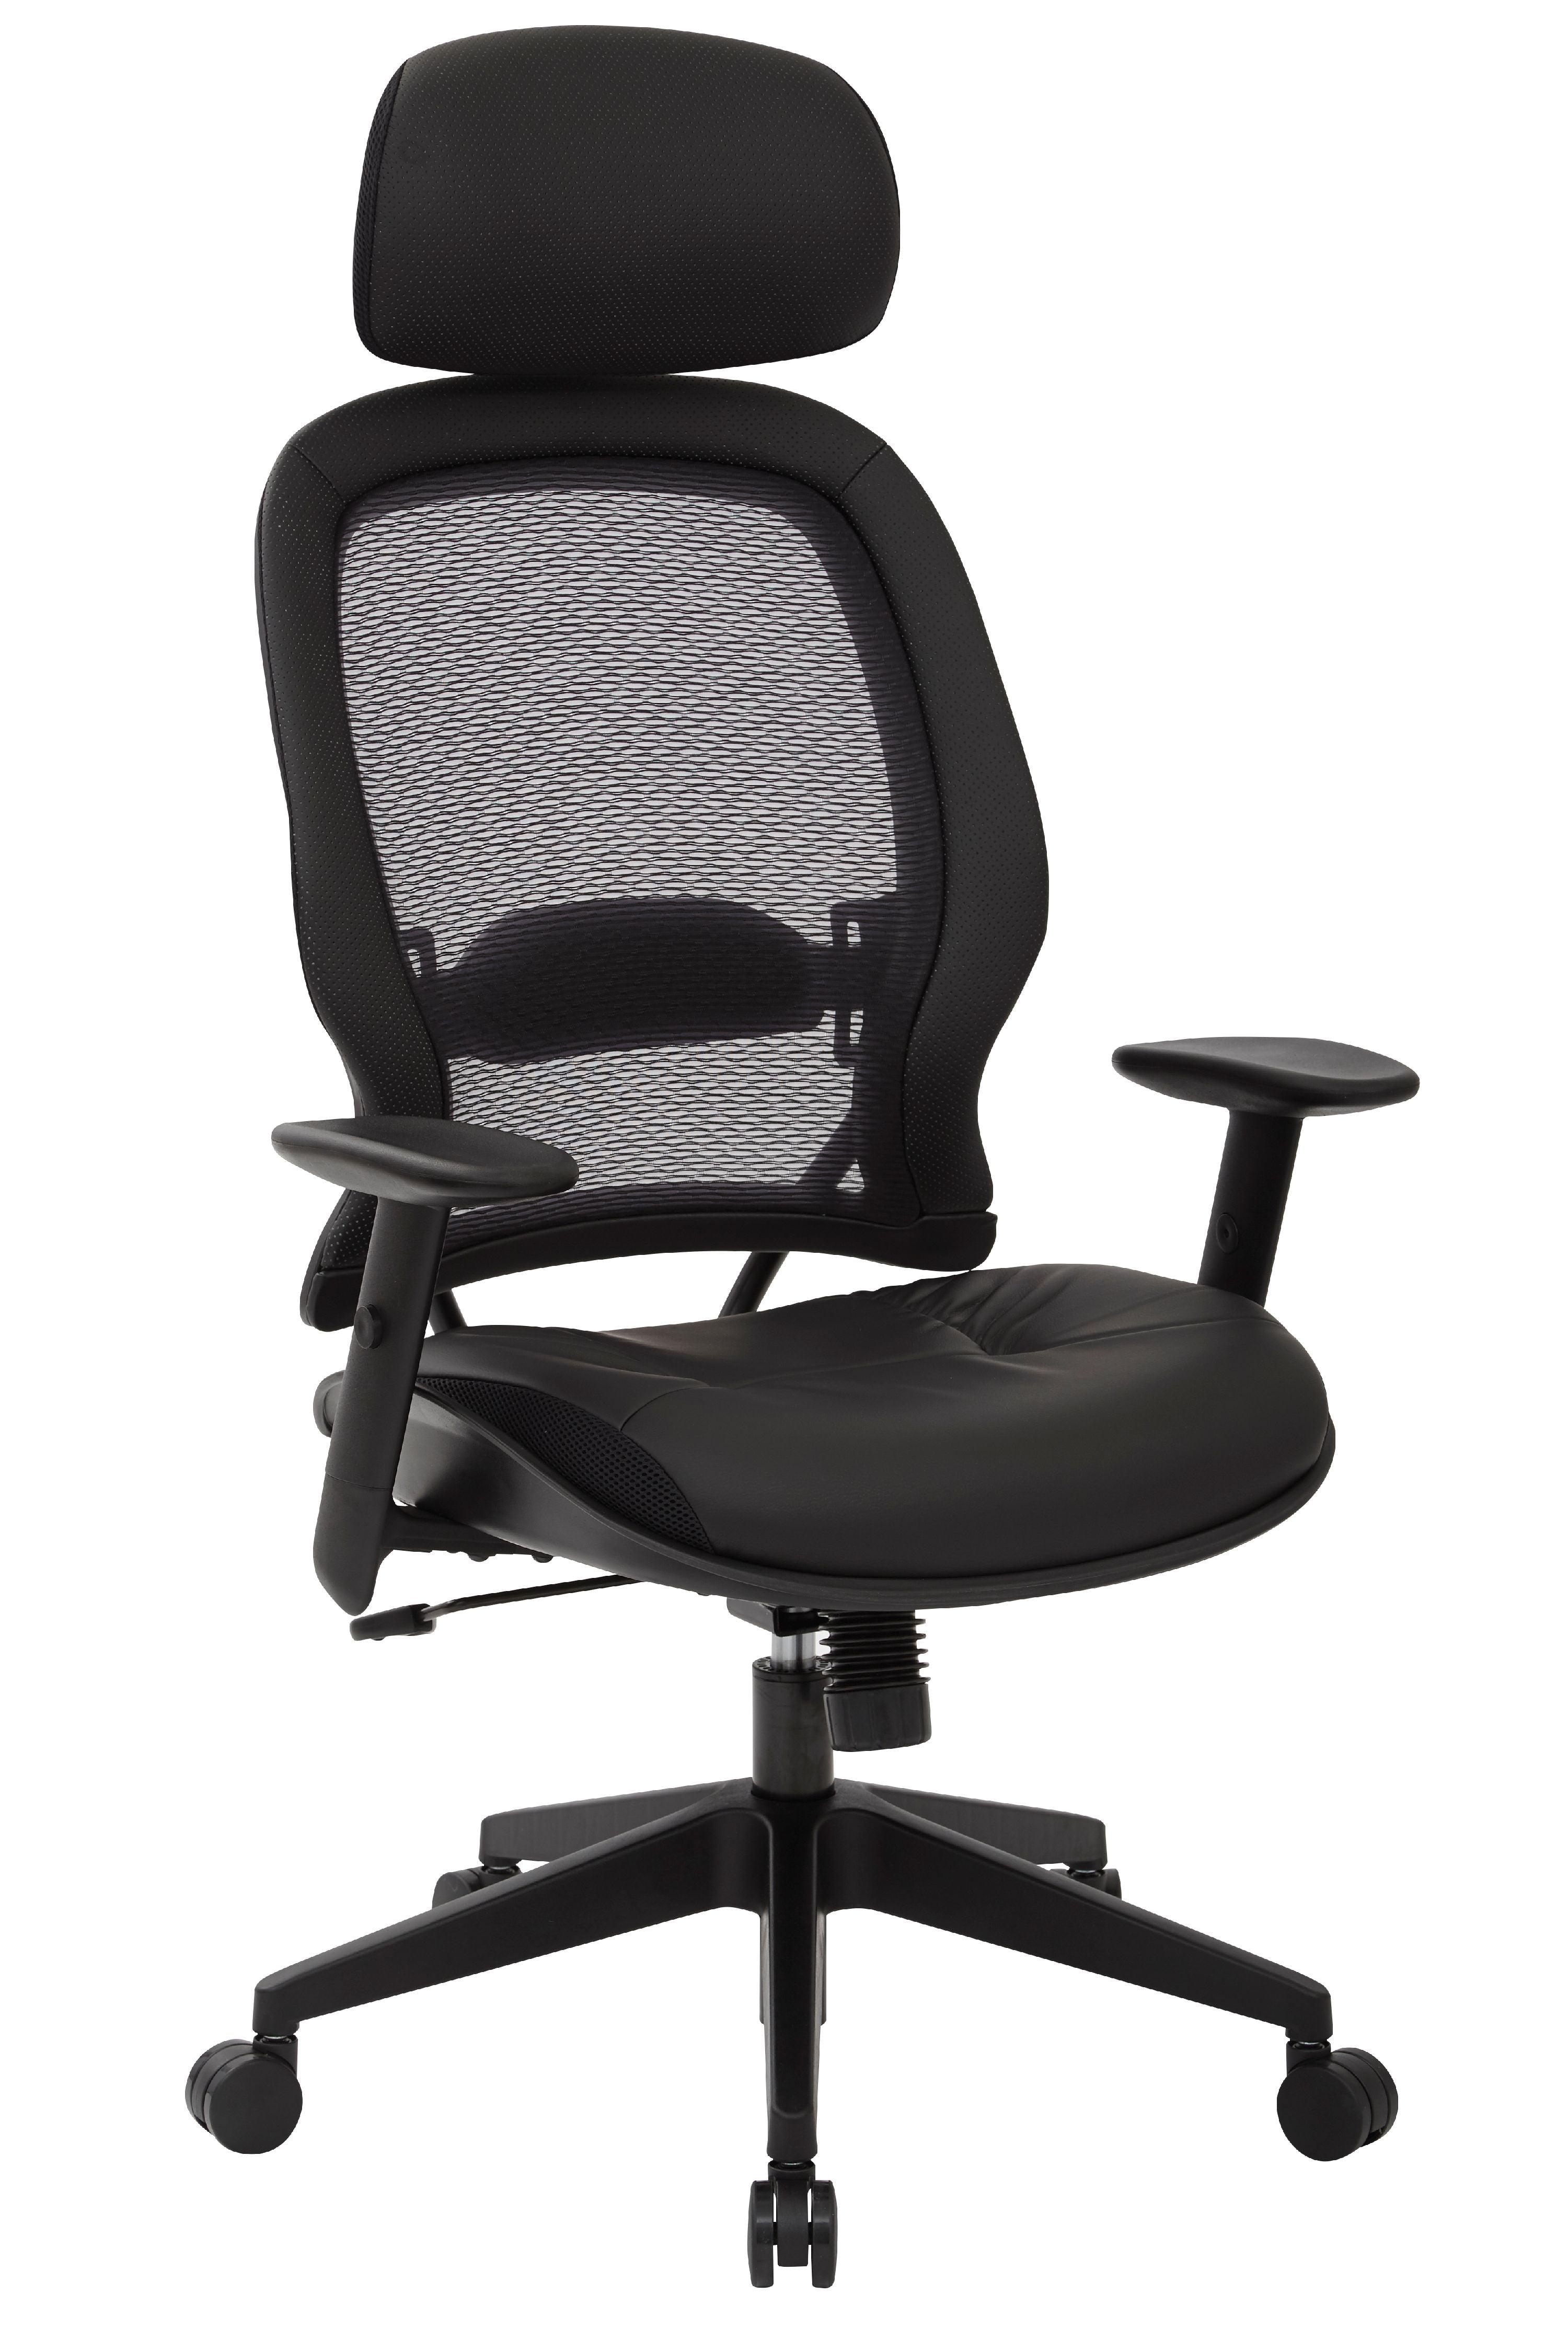 Executive High Back Black Leather Swivel Office Chair with Adjustable Arms